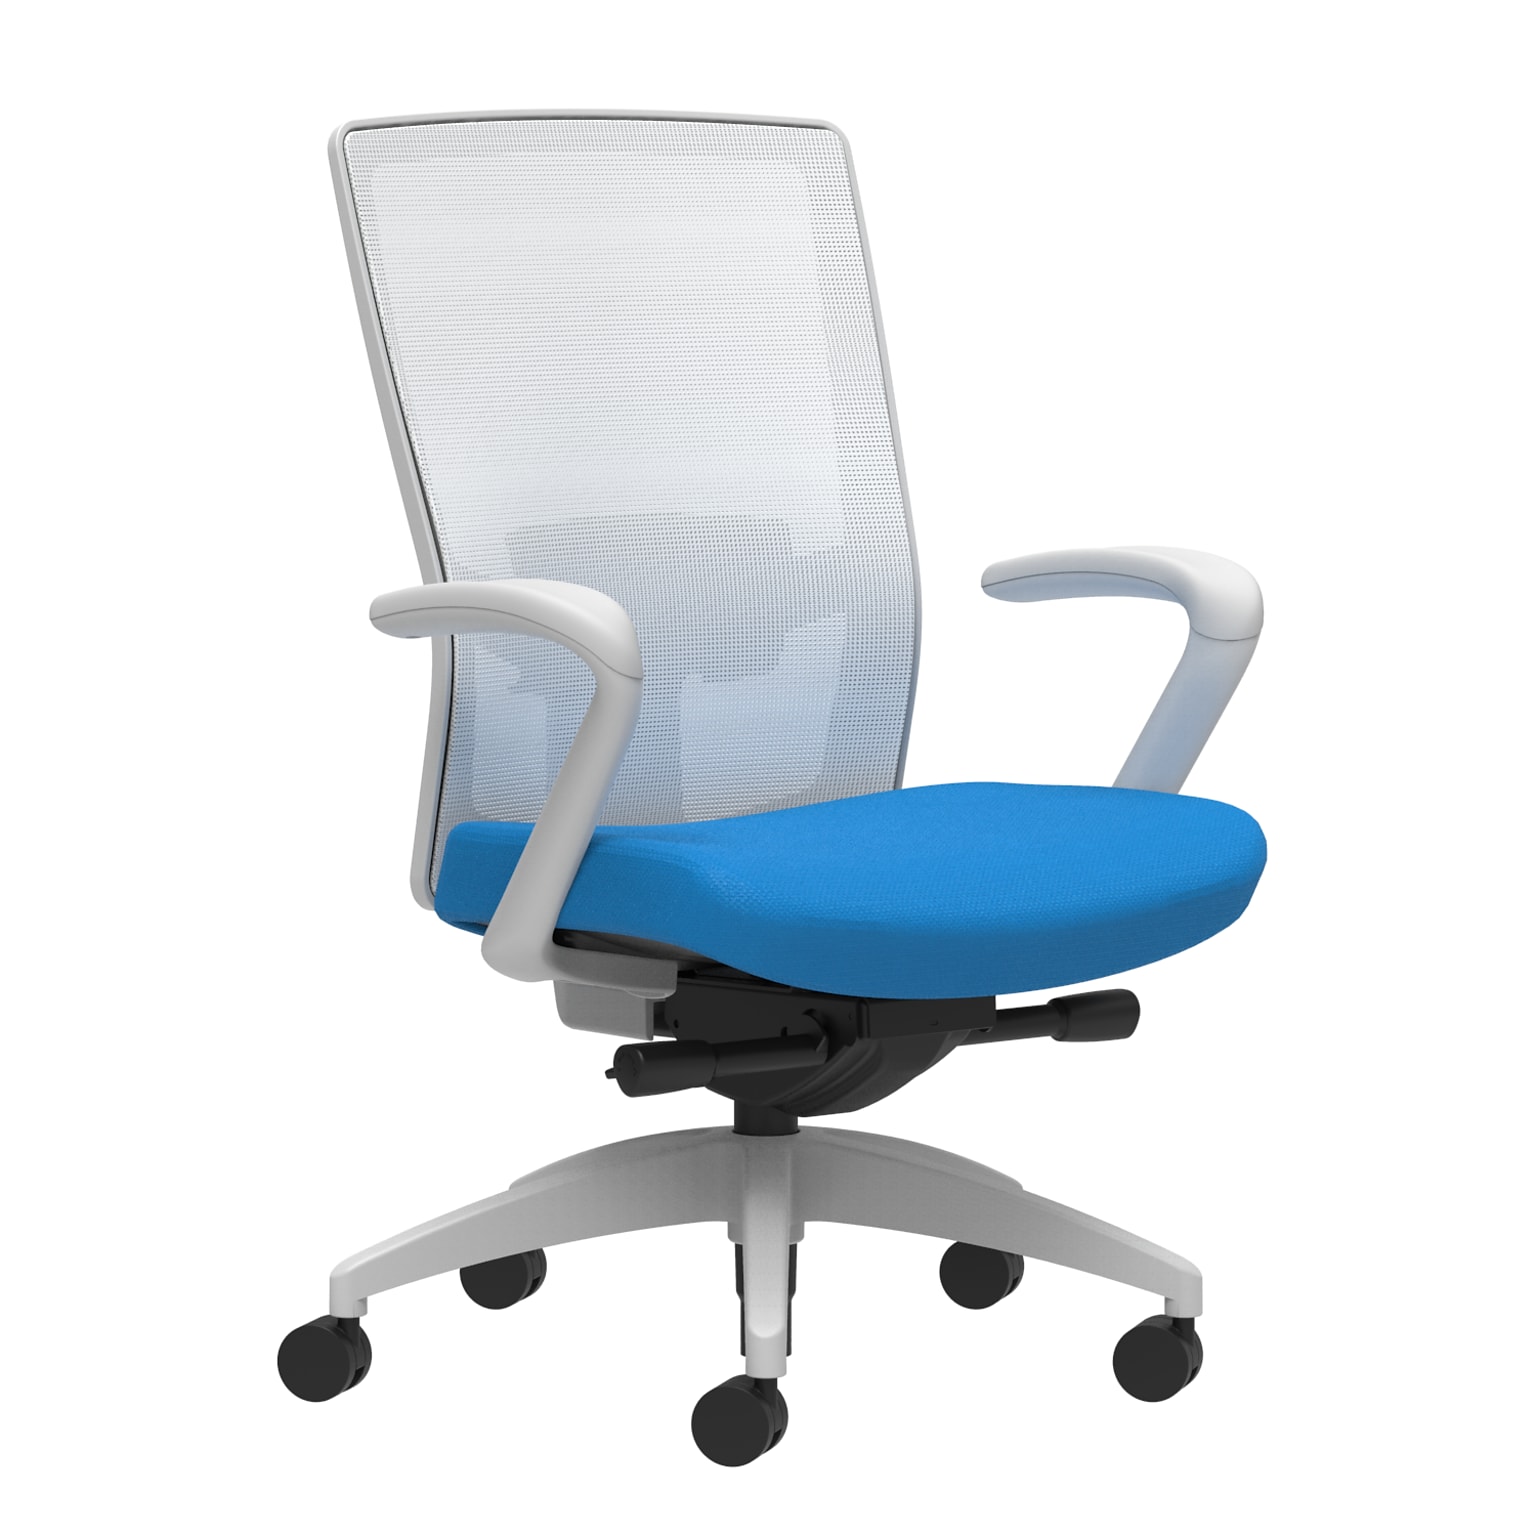 Union & Scale Workplace2.0™ Fabric Task Chair, Cobalt, Adjustable Lumbar, Fixed Arms, Advanced Synchro-Tilt Seat Control (53583)